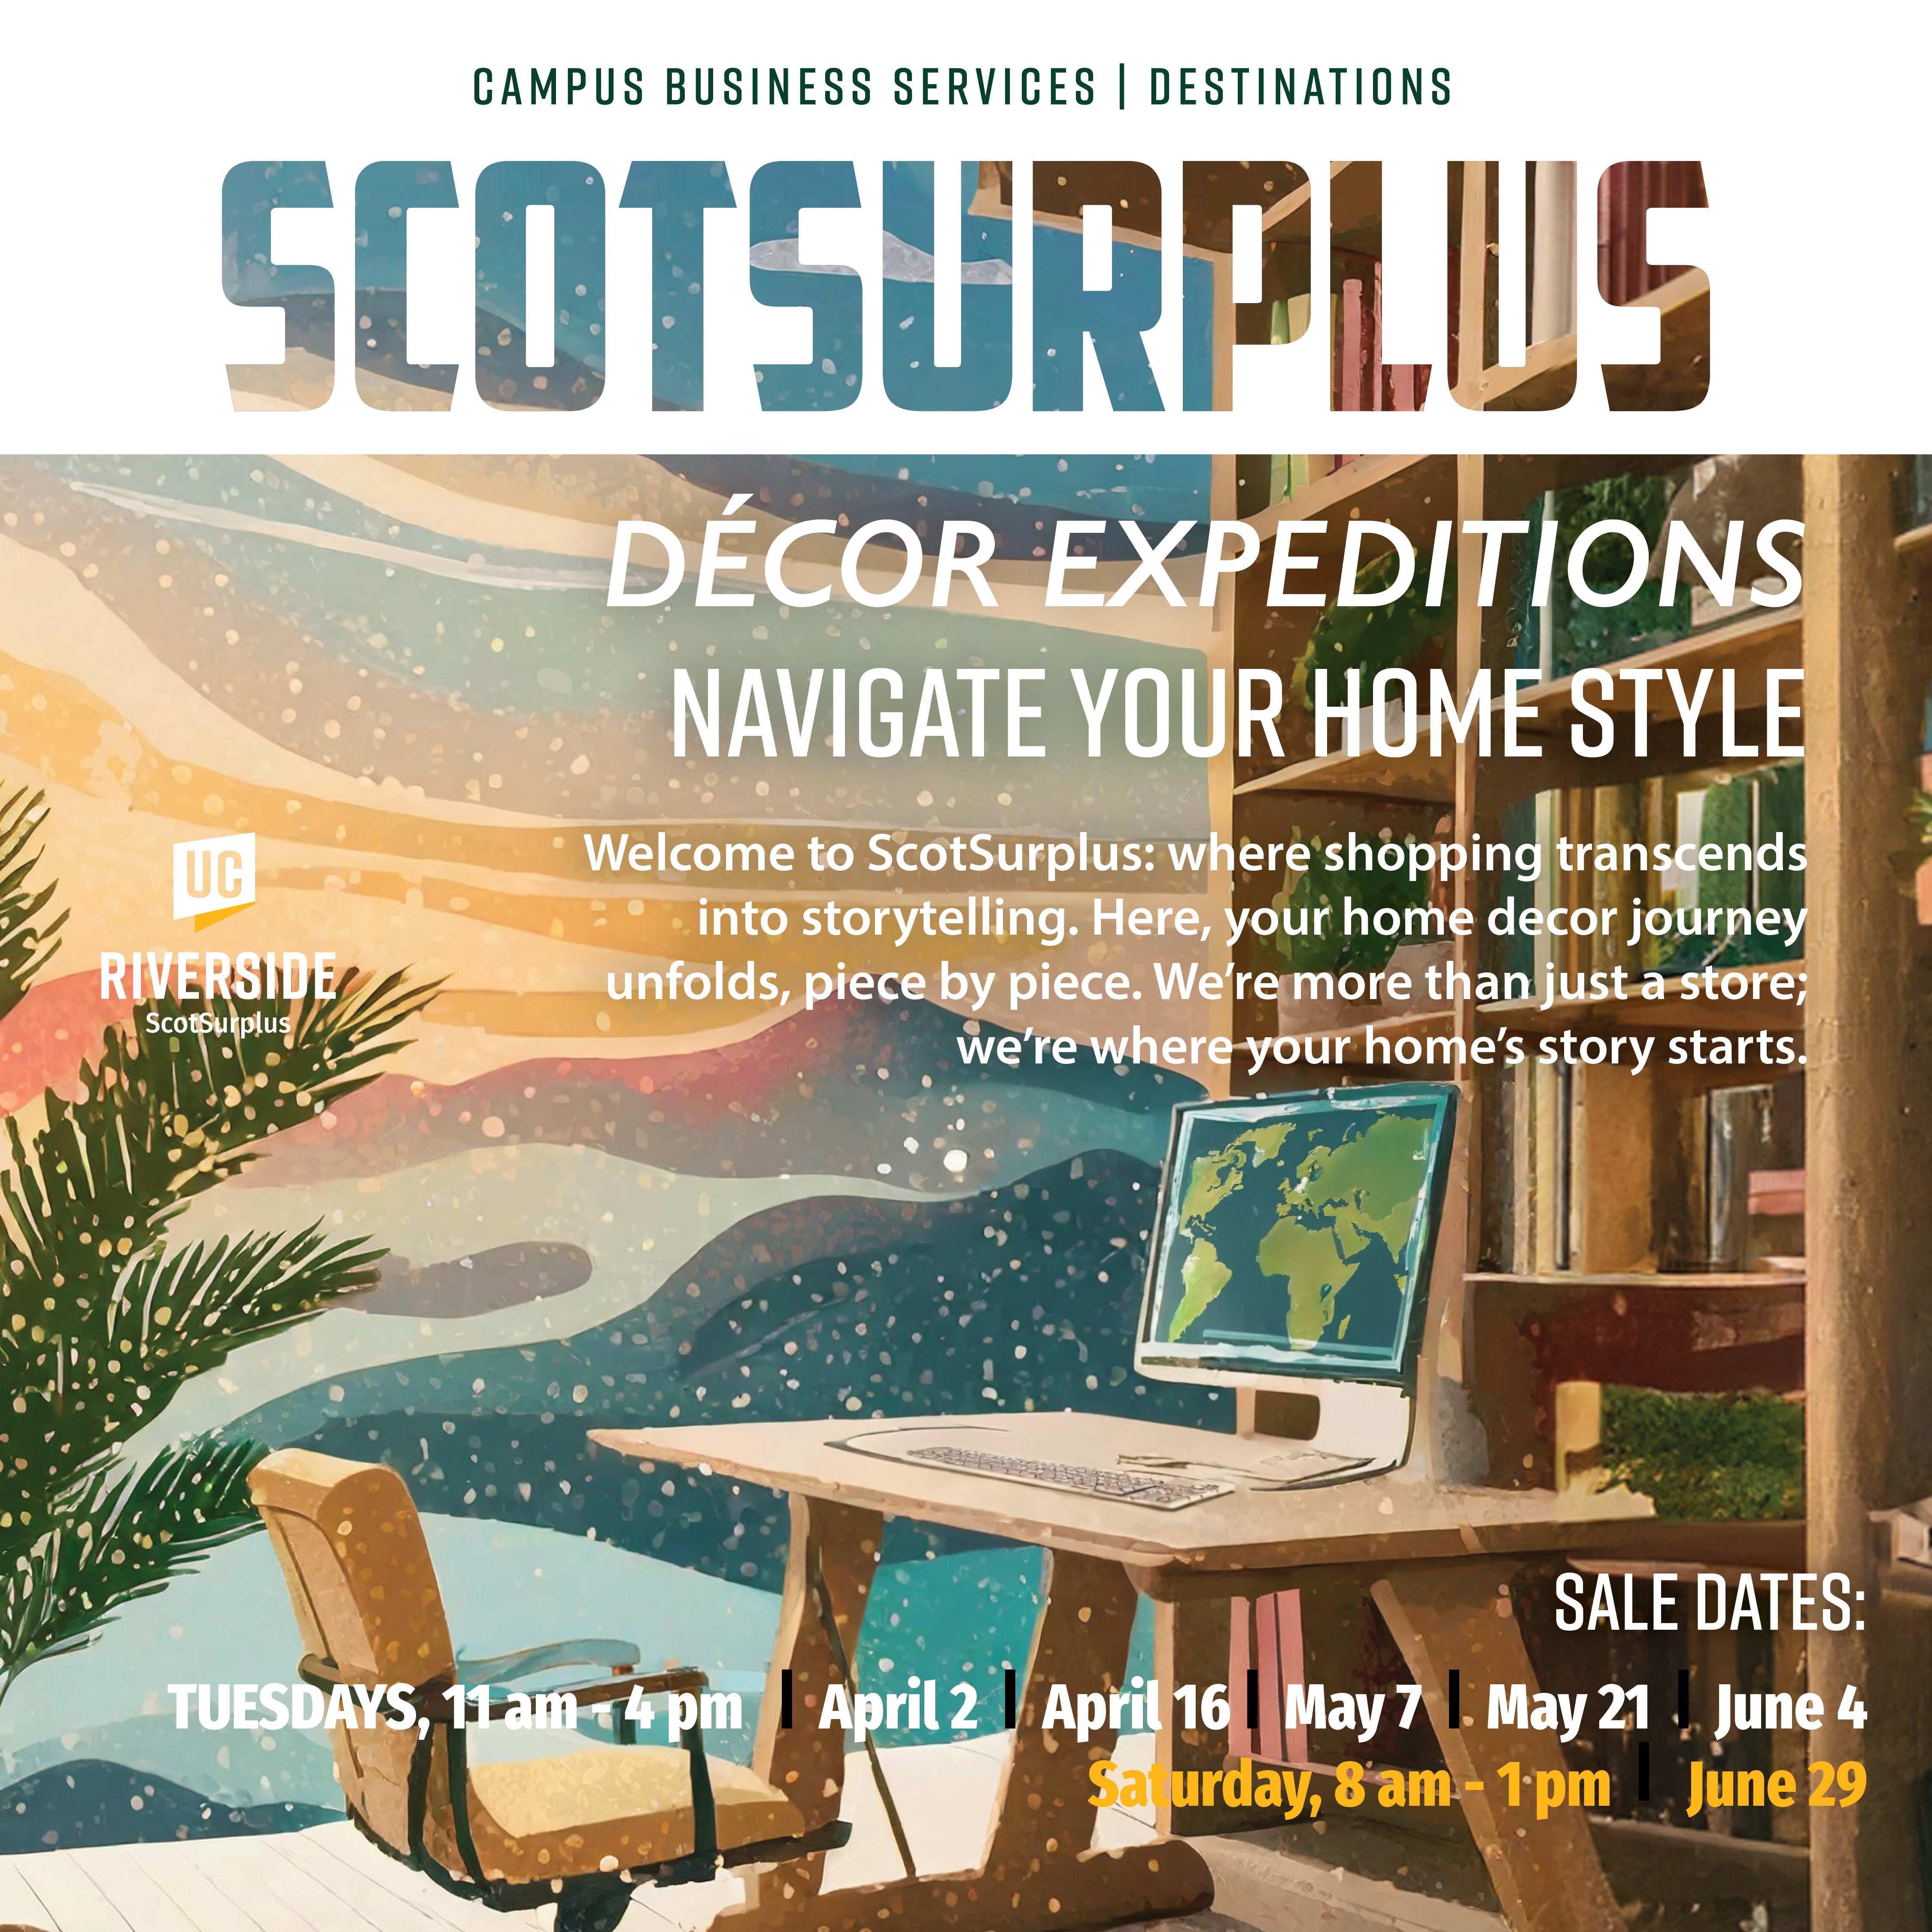 ScotSurplus Decor Expeditions Navigate Your Home Style